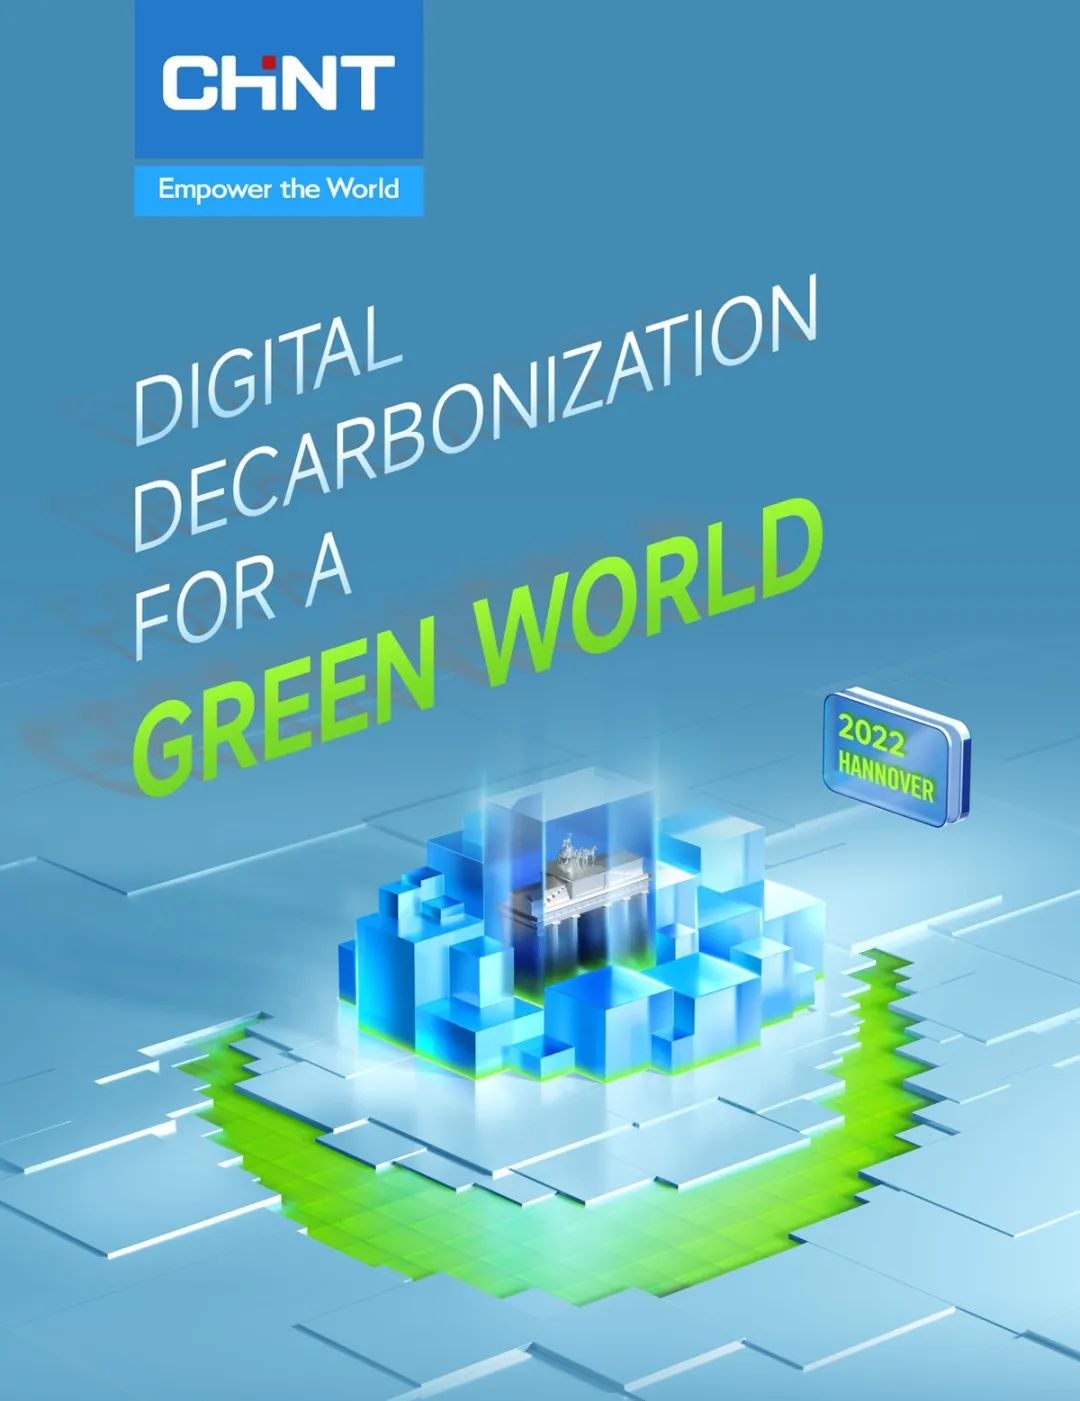 CHINT Set Off the Journey of Digital Decarbonization